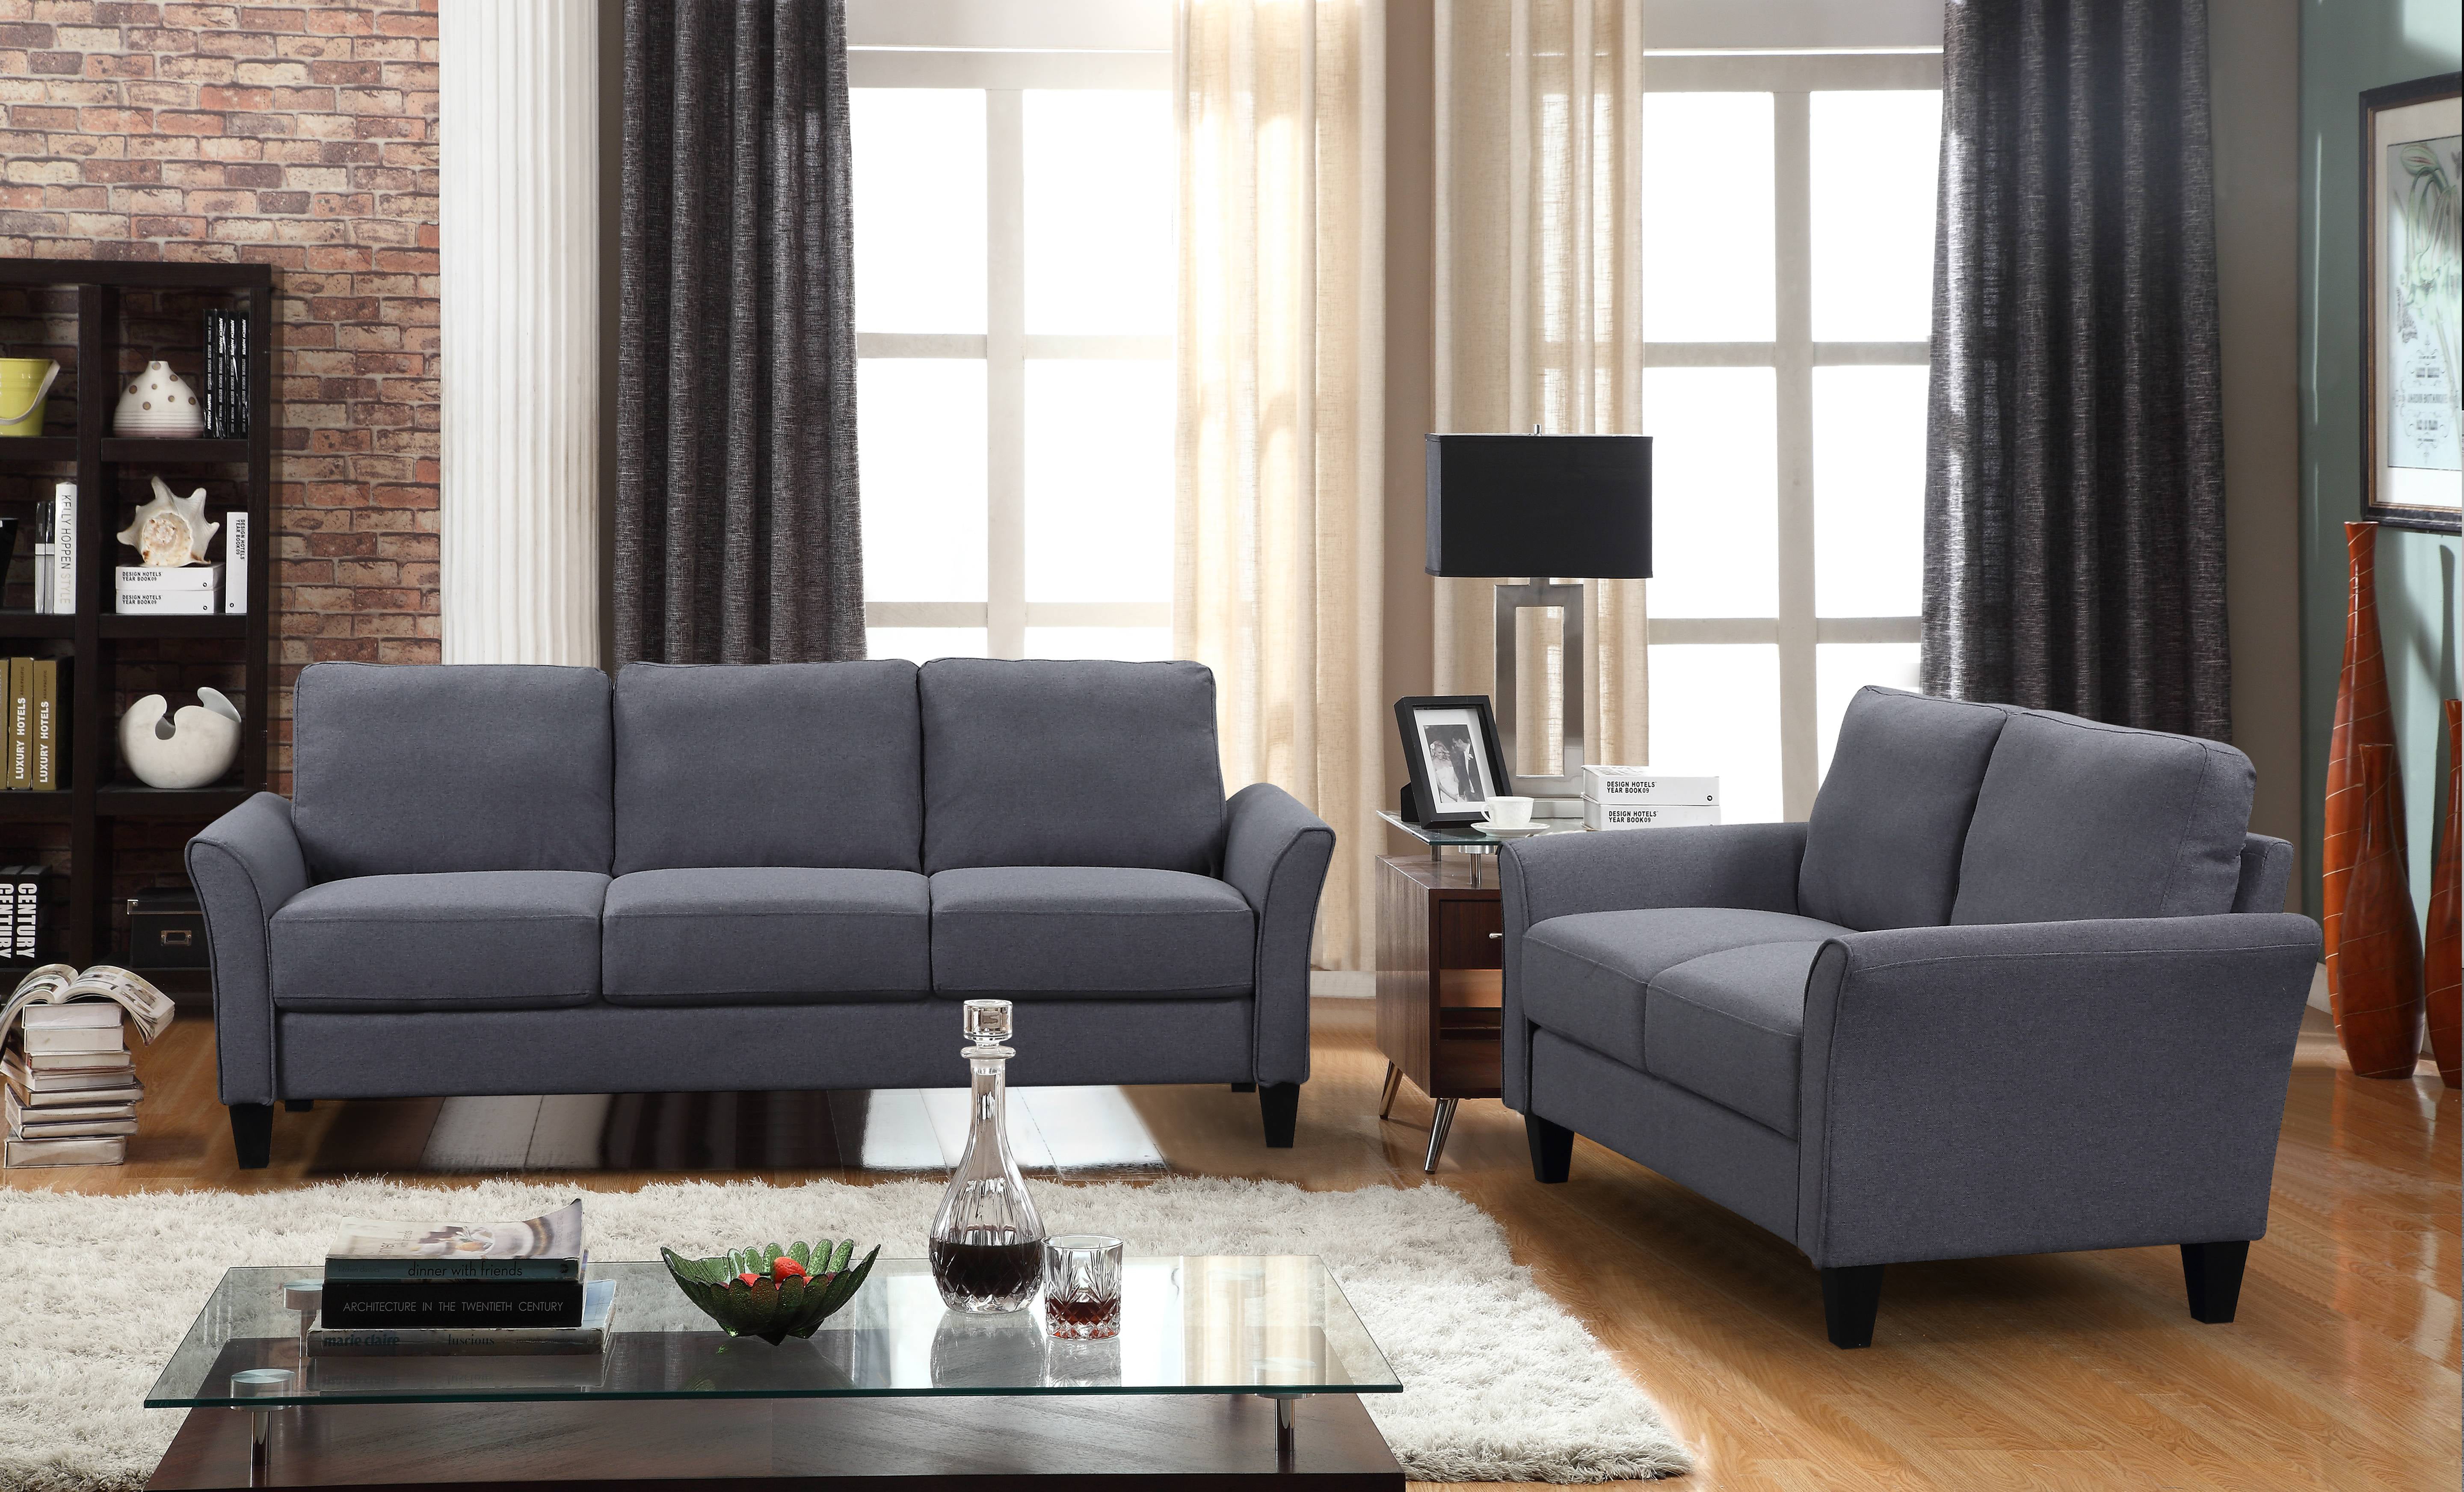 Couch And Sofa Set For Living Room Urhomepro 2 Piece Modern Sofas Set